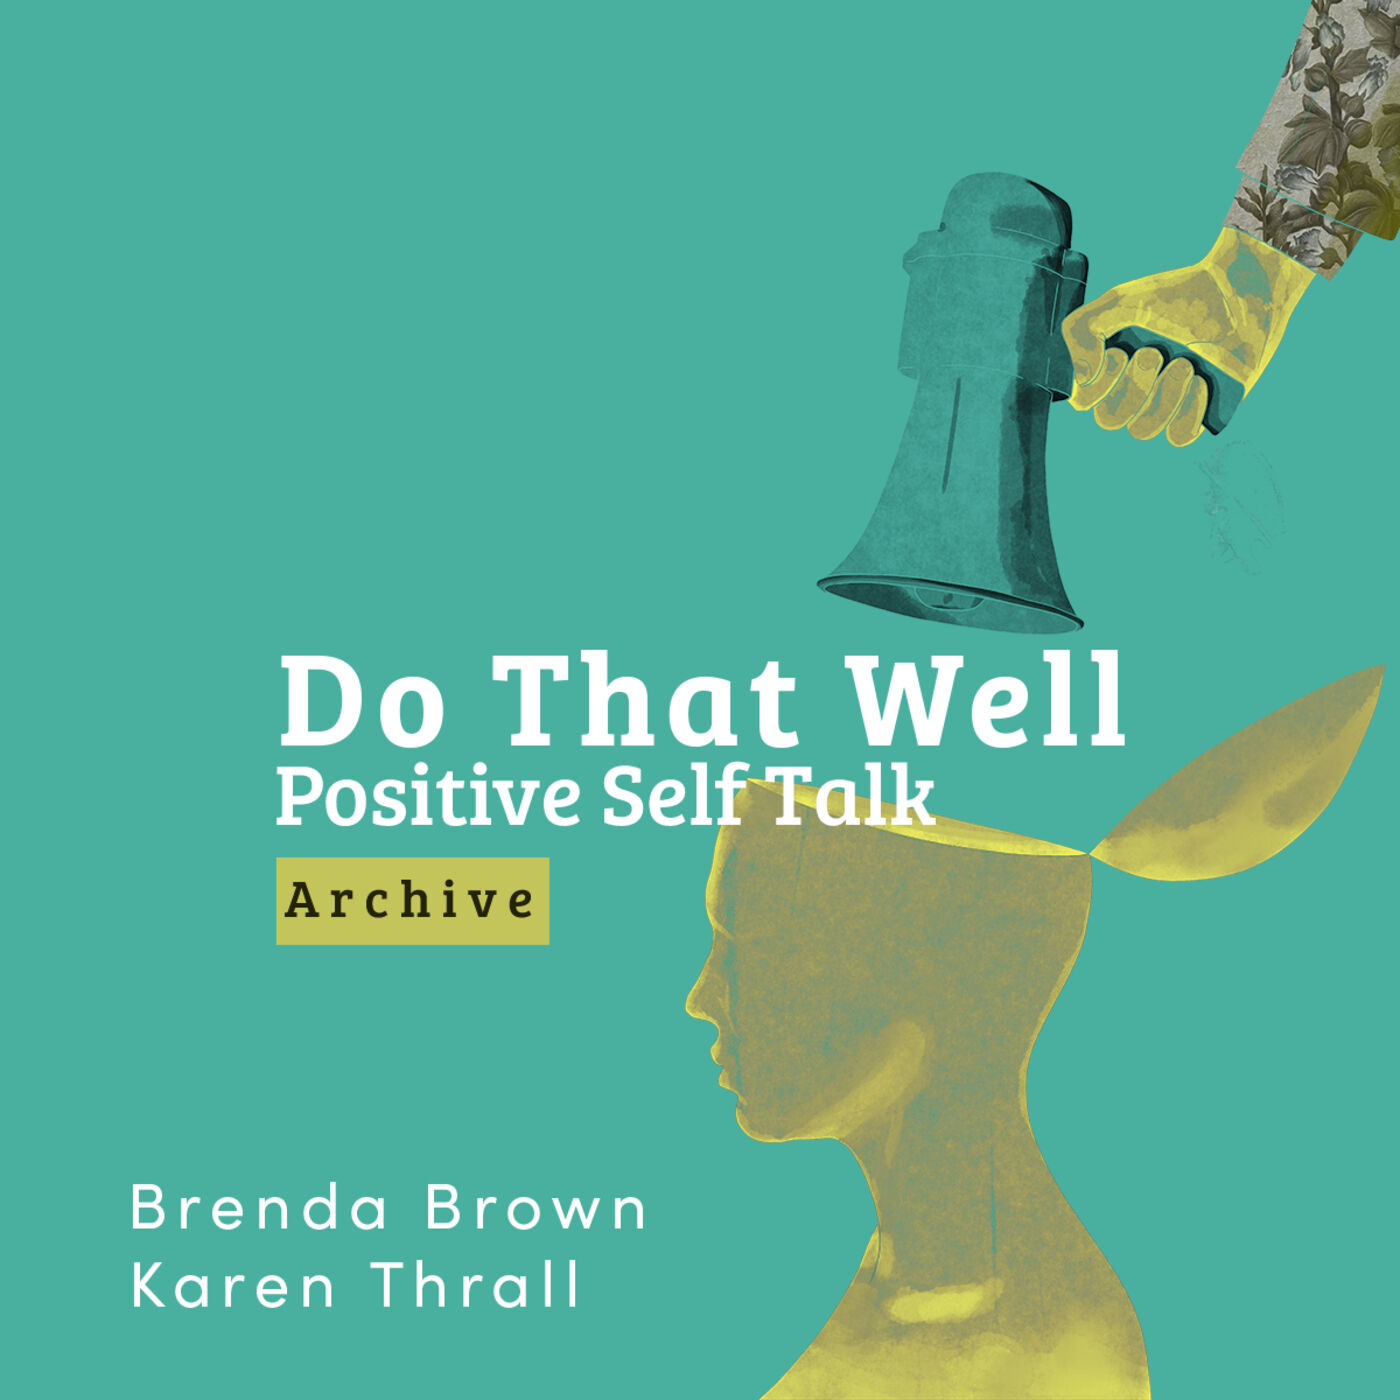 [archive] Do That Well:  Positive Self Talk